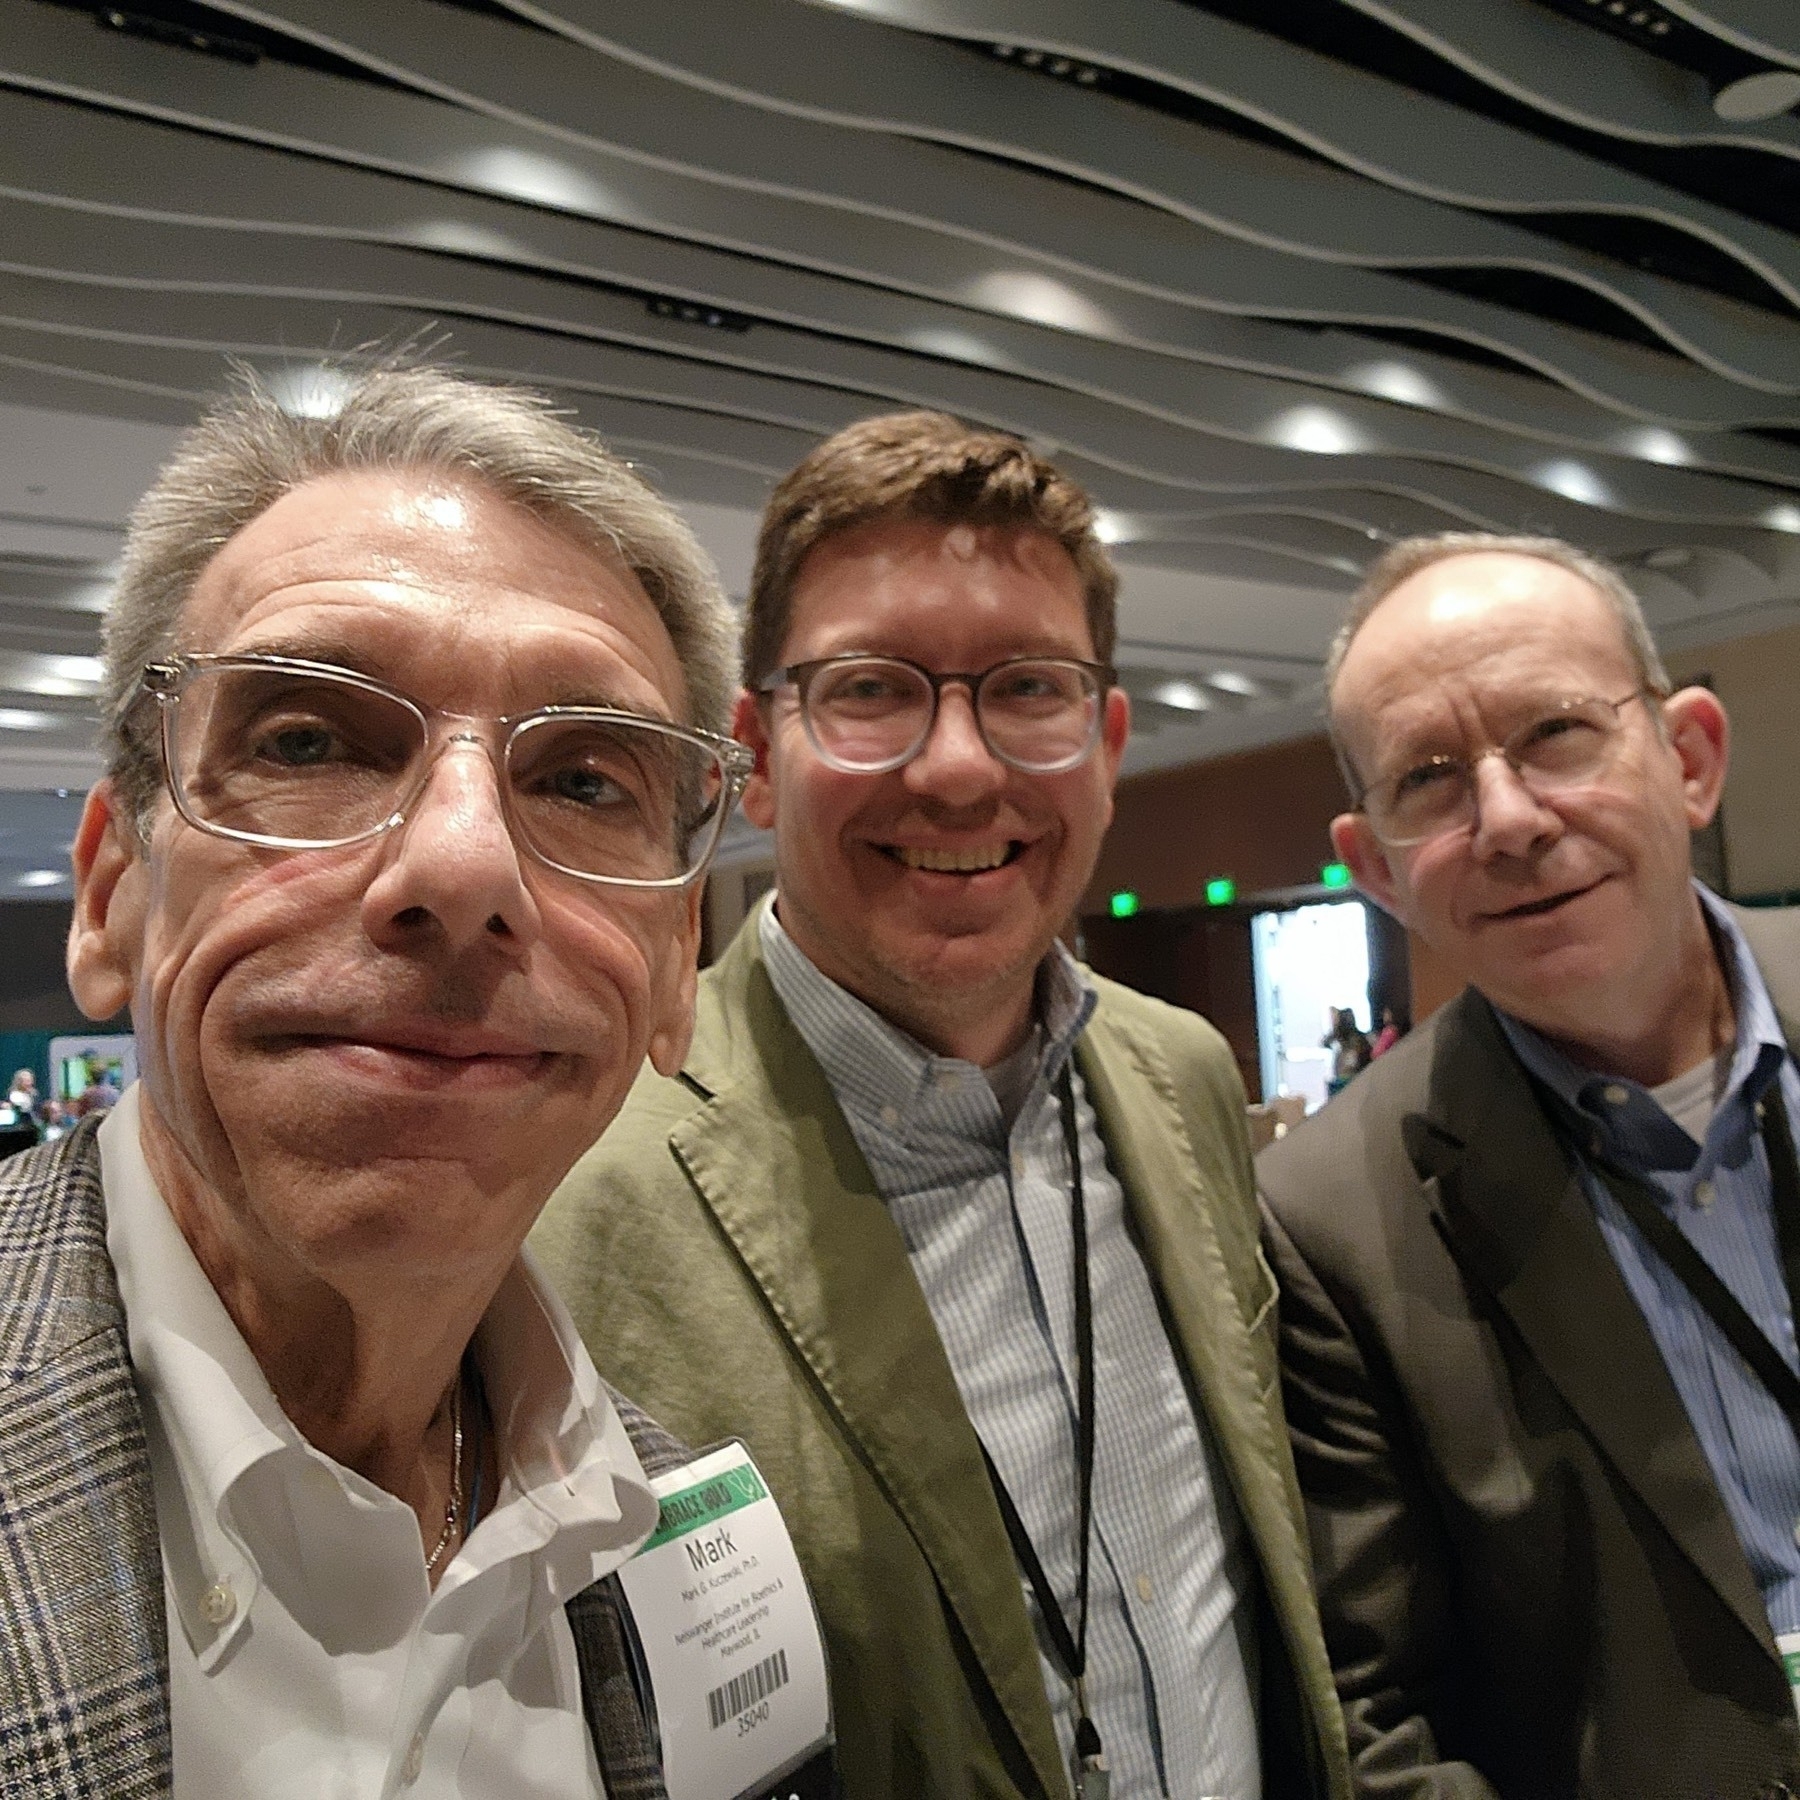 Some of my favorite colleagues (Mark & Patrick) and I in the exhibit hall at the 2024 Catholic Health Assembly. Photo by [@BioethxMark@mstdn.social](https://micro.blog/BioethxMark@mstdn.social)